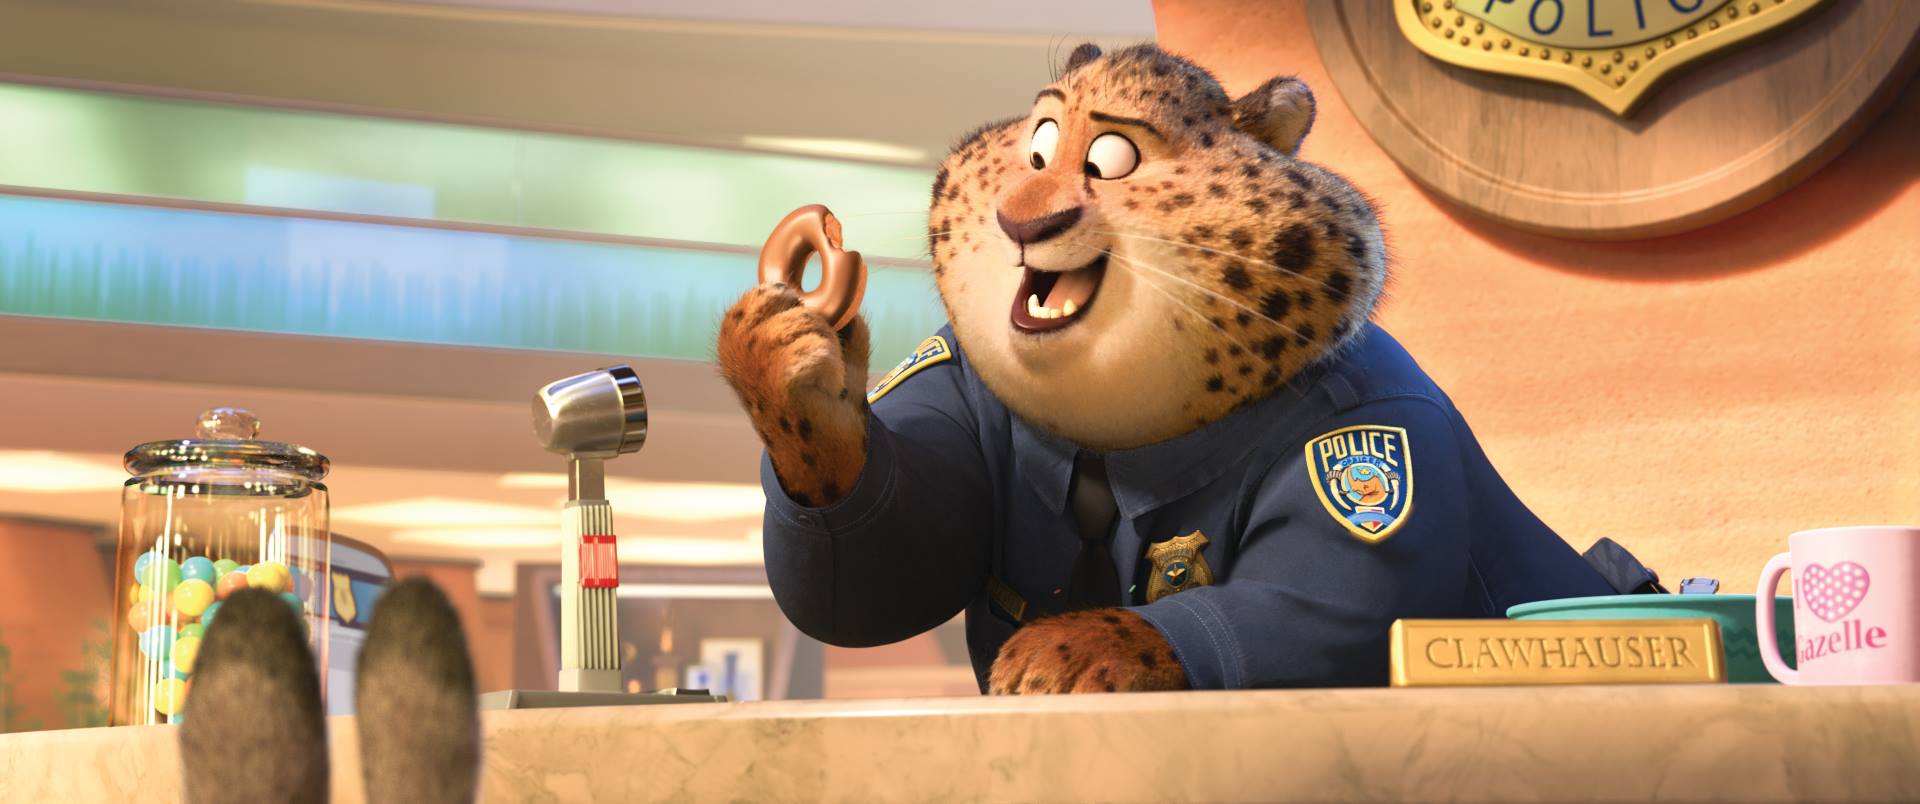 Clawhauser from "Zootopia" (Zootopia Facebook Page)